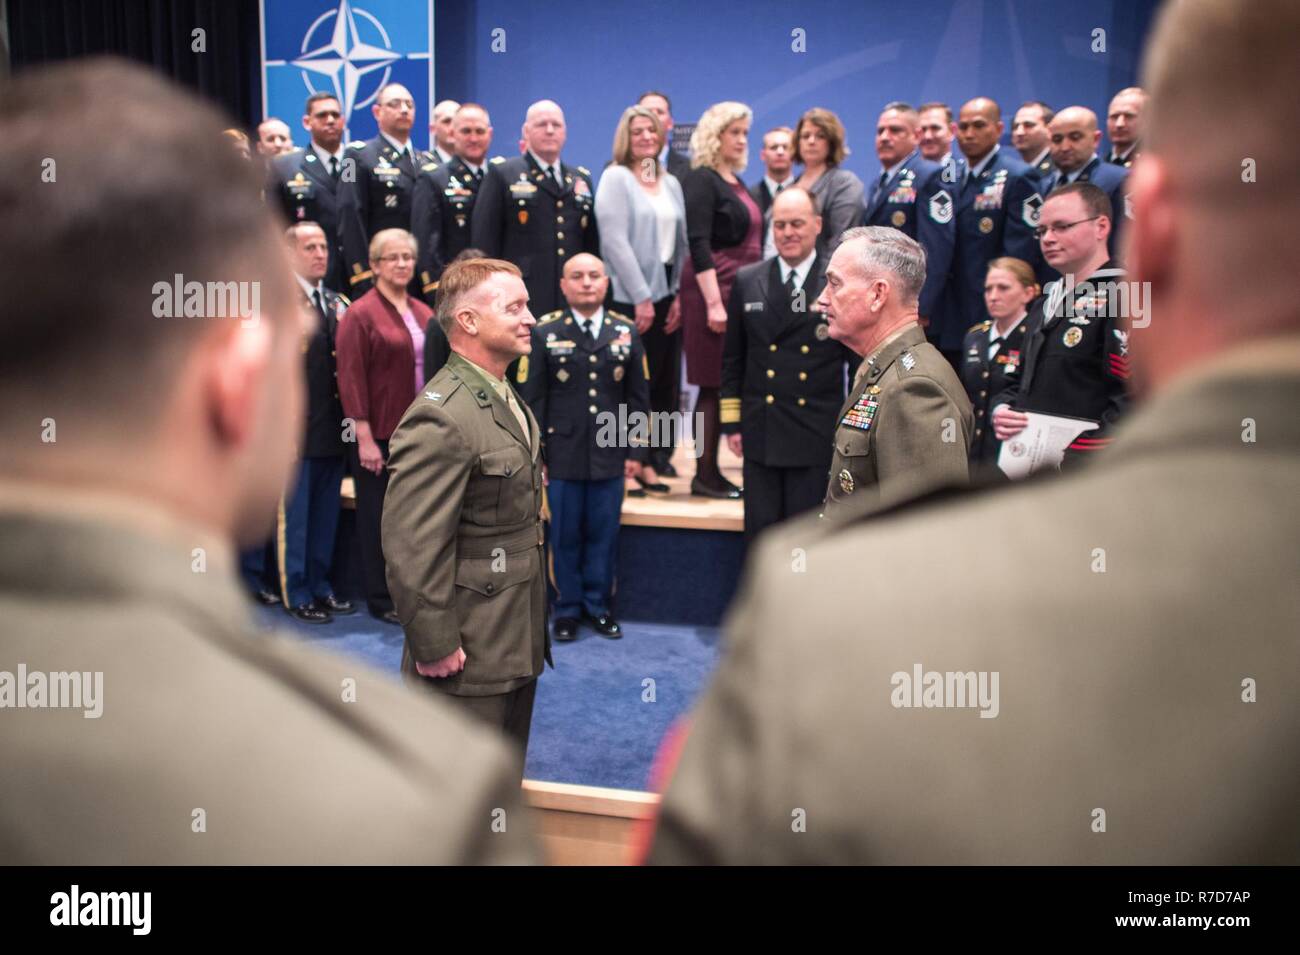 U.S. Marine Corps Gen. Joseph F. Dunford, Jr., chairman of the Joint Chiefs of Staff, participates in an award ceremony for U.S. Marine Col. Philippe ‘Boz’ Rogers, U.S. Military Delegation to the North Atlantic Treaty Organization (NATO) Chief of Staff, during a Military Committee in Chiefs of Defense (MC/CS) Session at NATO Headquarters, May 17, 2017. The Chiefs of Defense meet to discuss Afghanistan, countering terrorism and other NATO operations and missions to provide the North Atlantic Council with consensus-based military advice on how to best meet global security challenges. (DoD Stock Photo